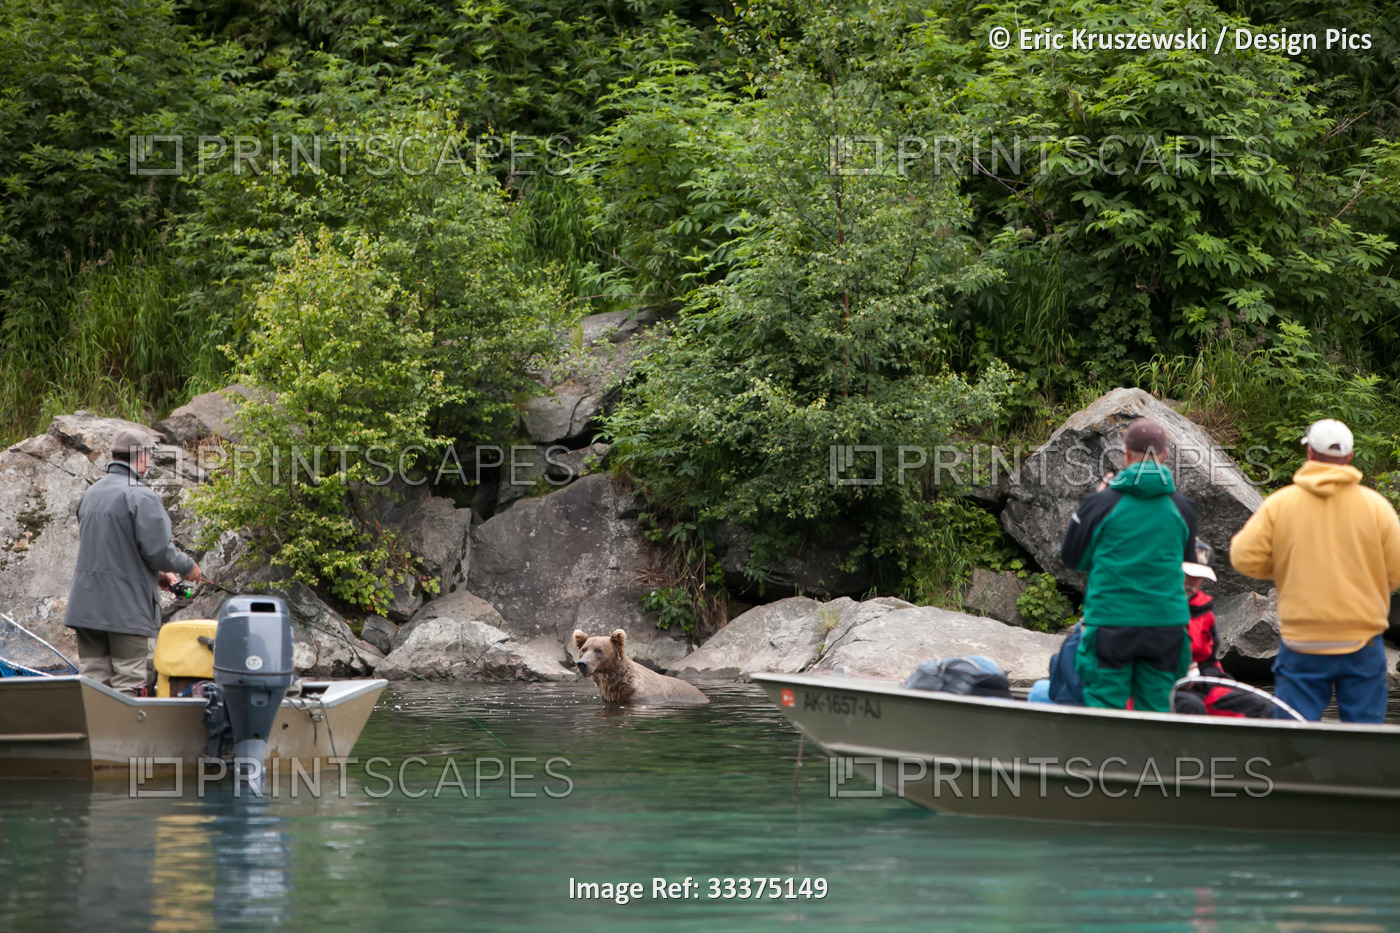 Several fishermen in boats observe and photograph an Alaskan brown grizzly bear ...